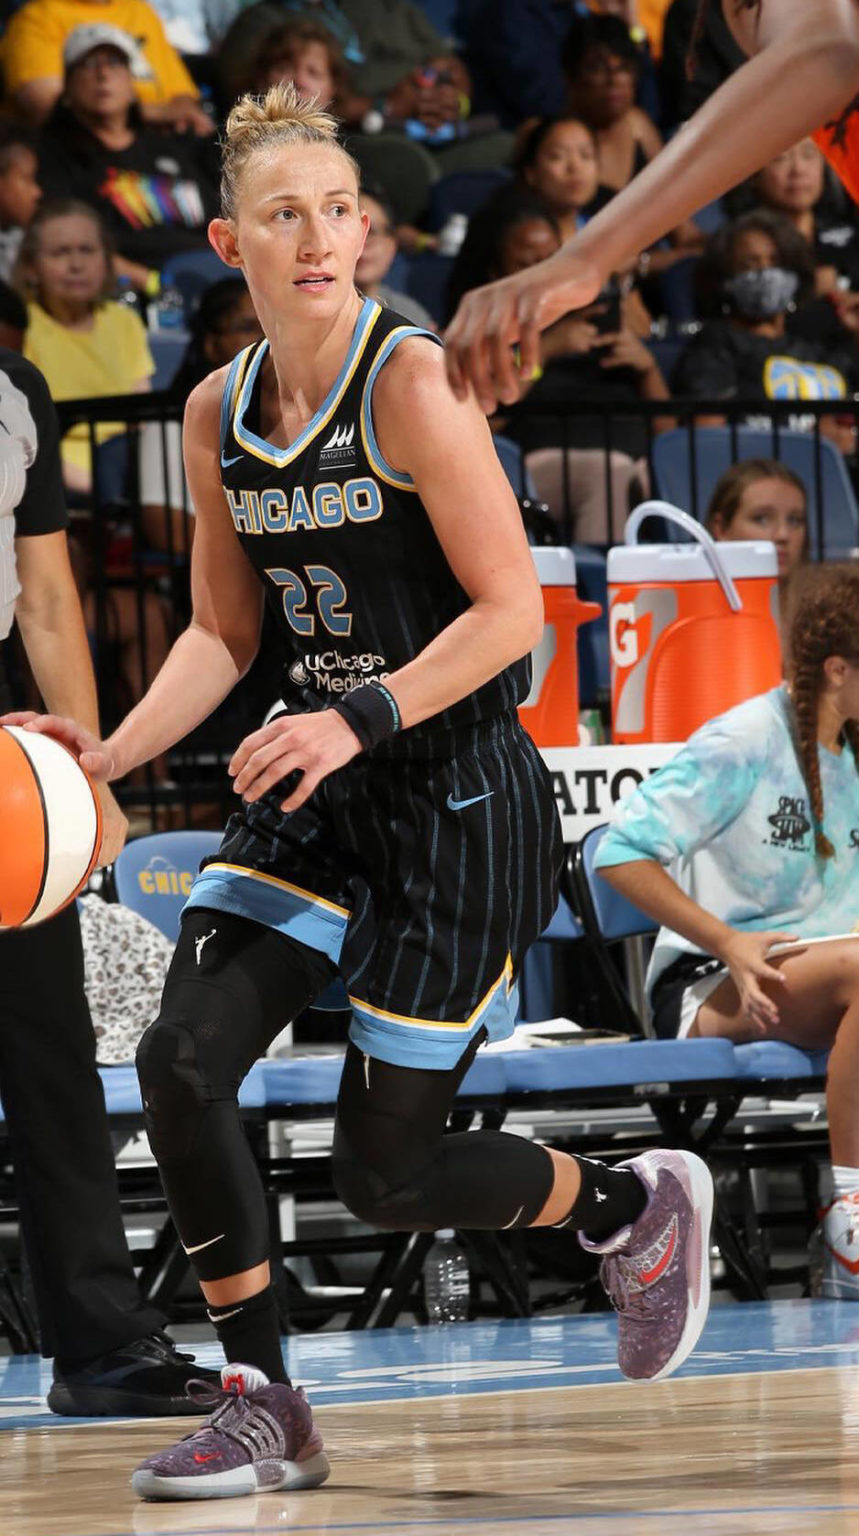 ExKentwood star Courtney Vandersloot to play for New York Liberty